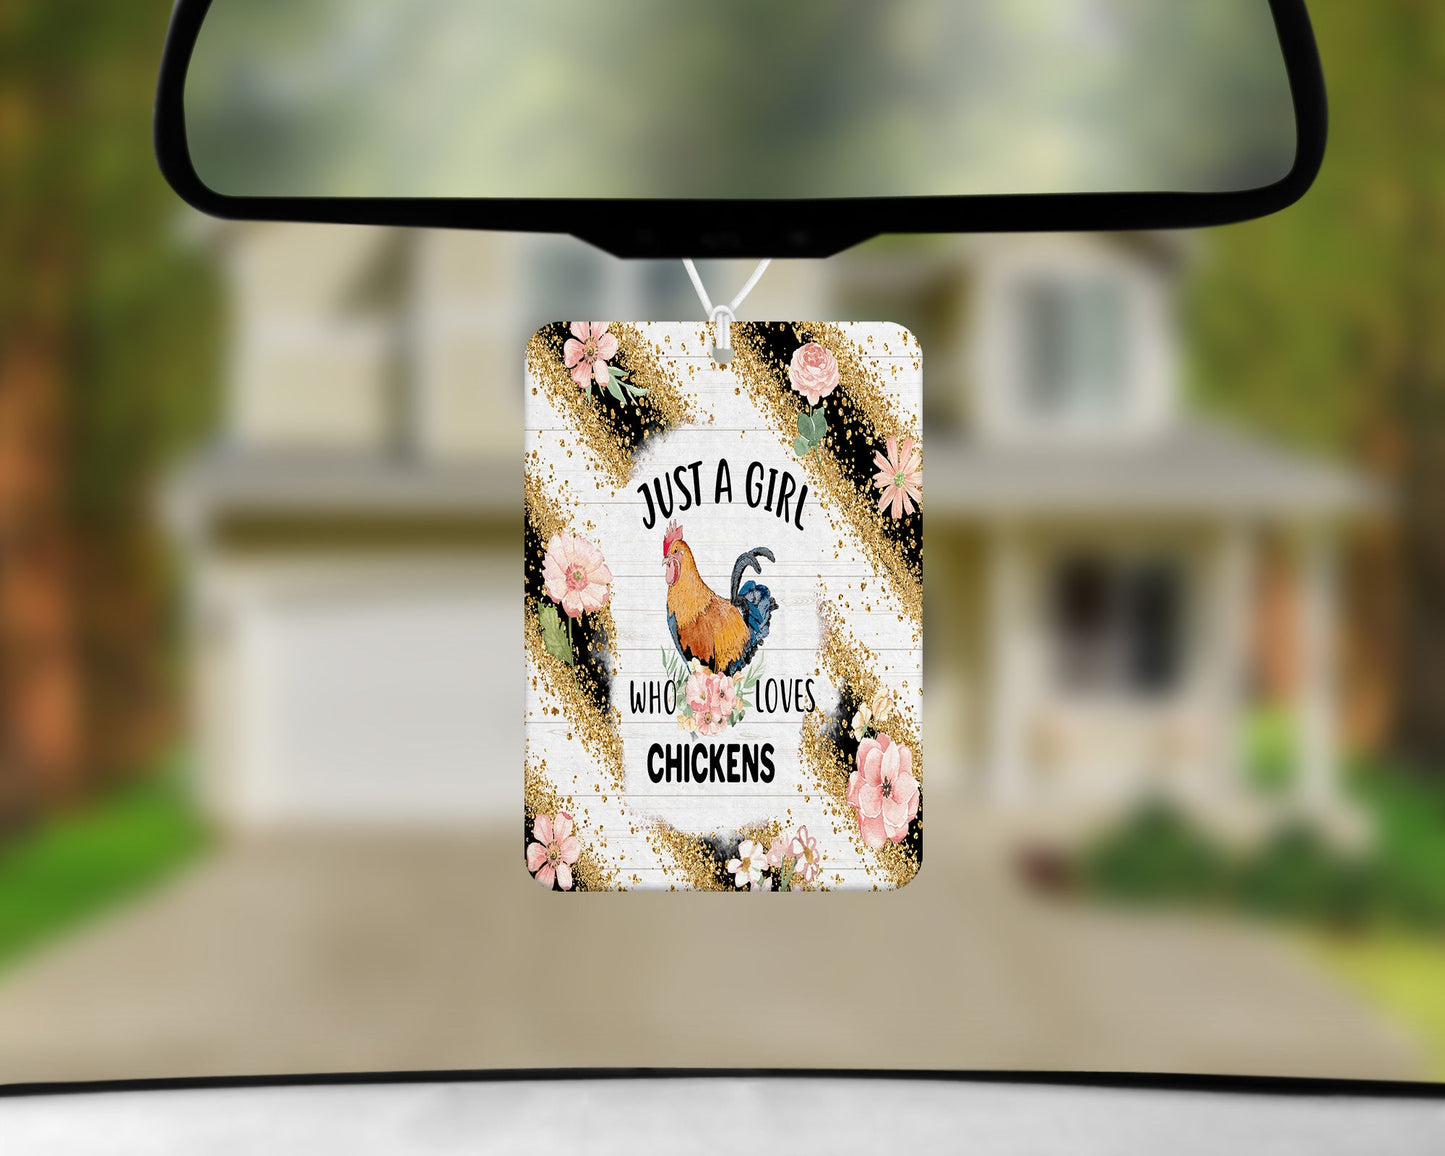 Just A Girl Who Loves Chickens|Freshie|Includes Scent Bottle - Vehicle Air Freshener